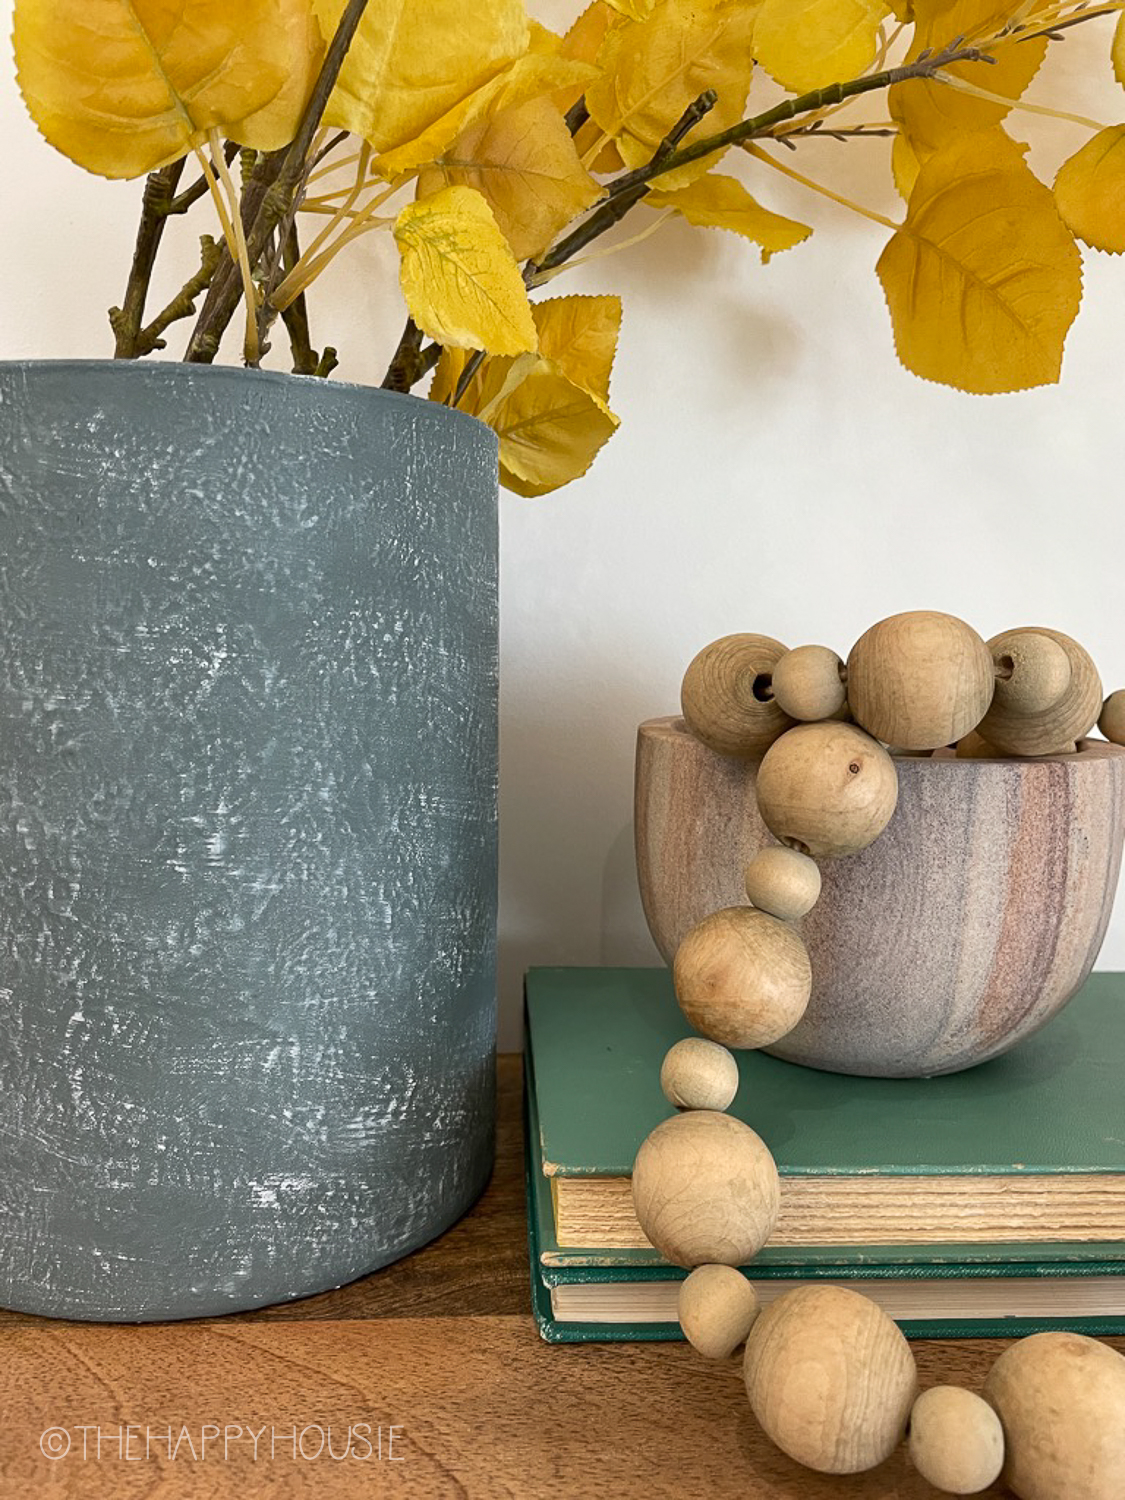 The textured vase beside wooden beads.